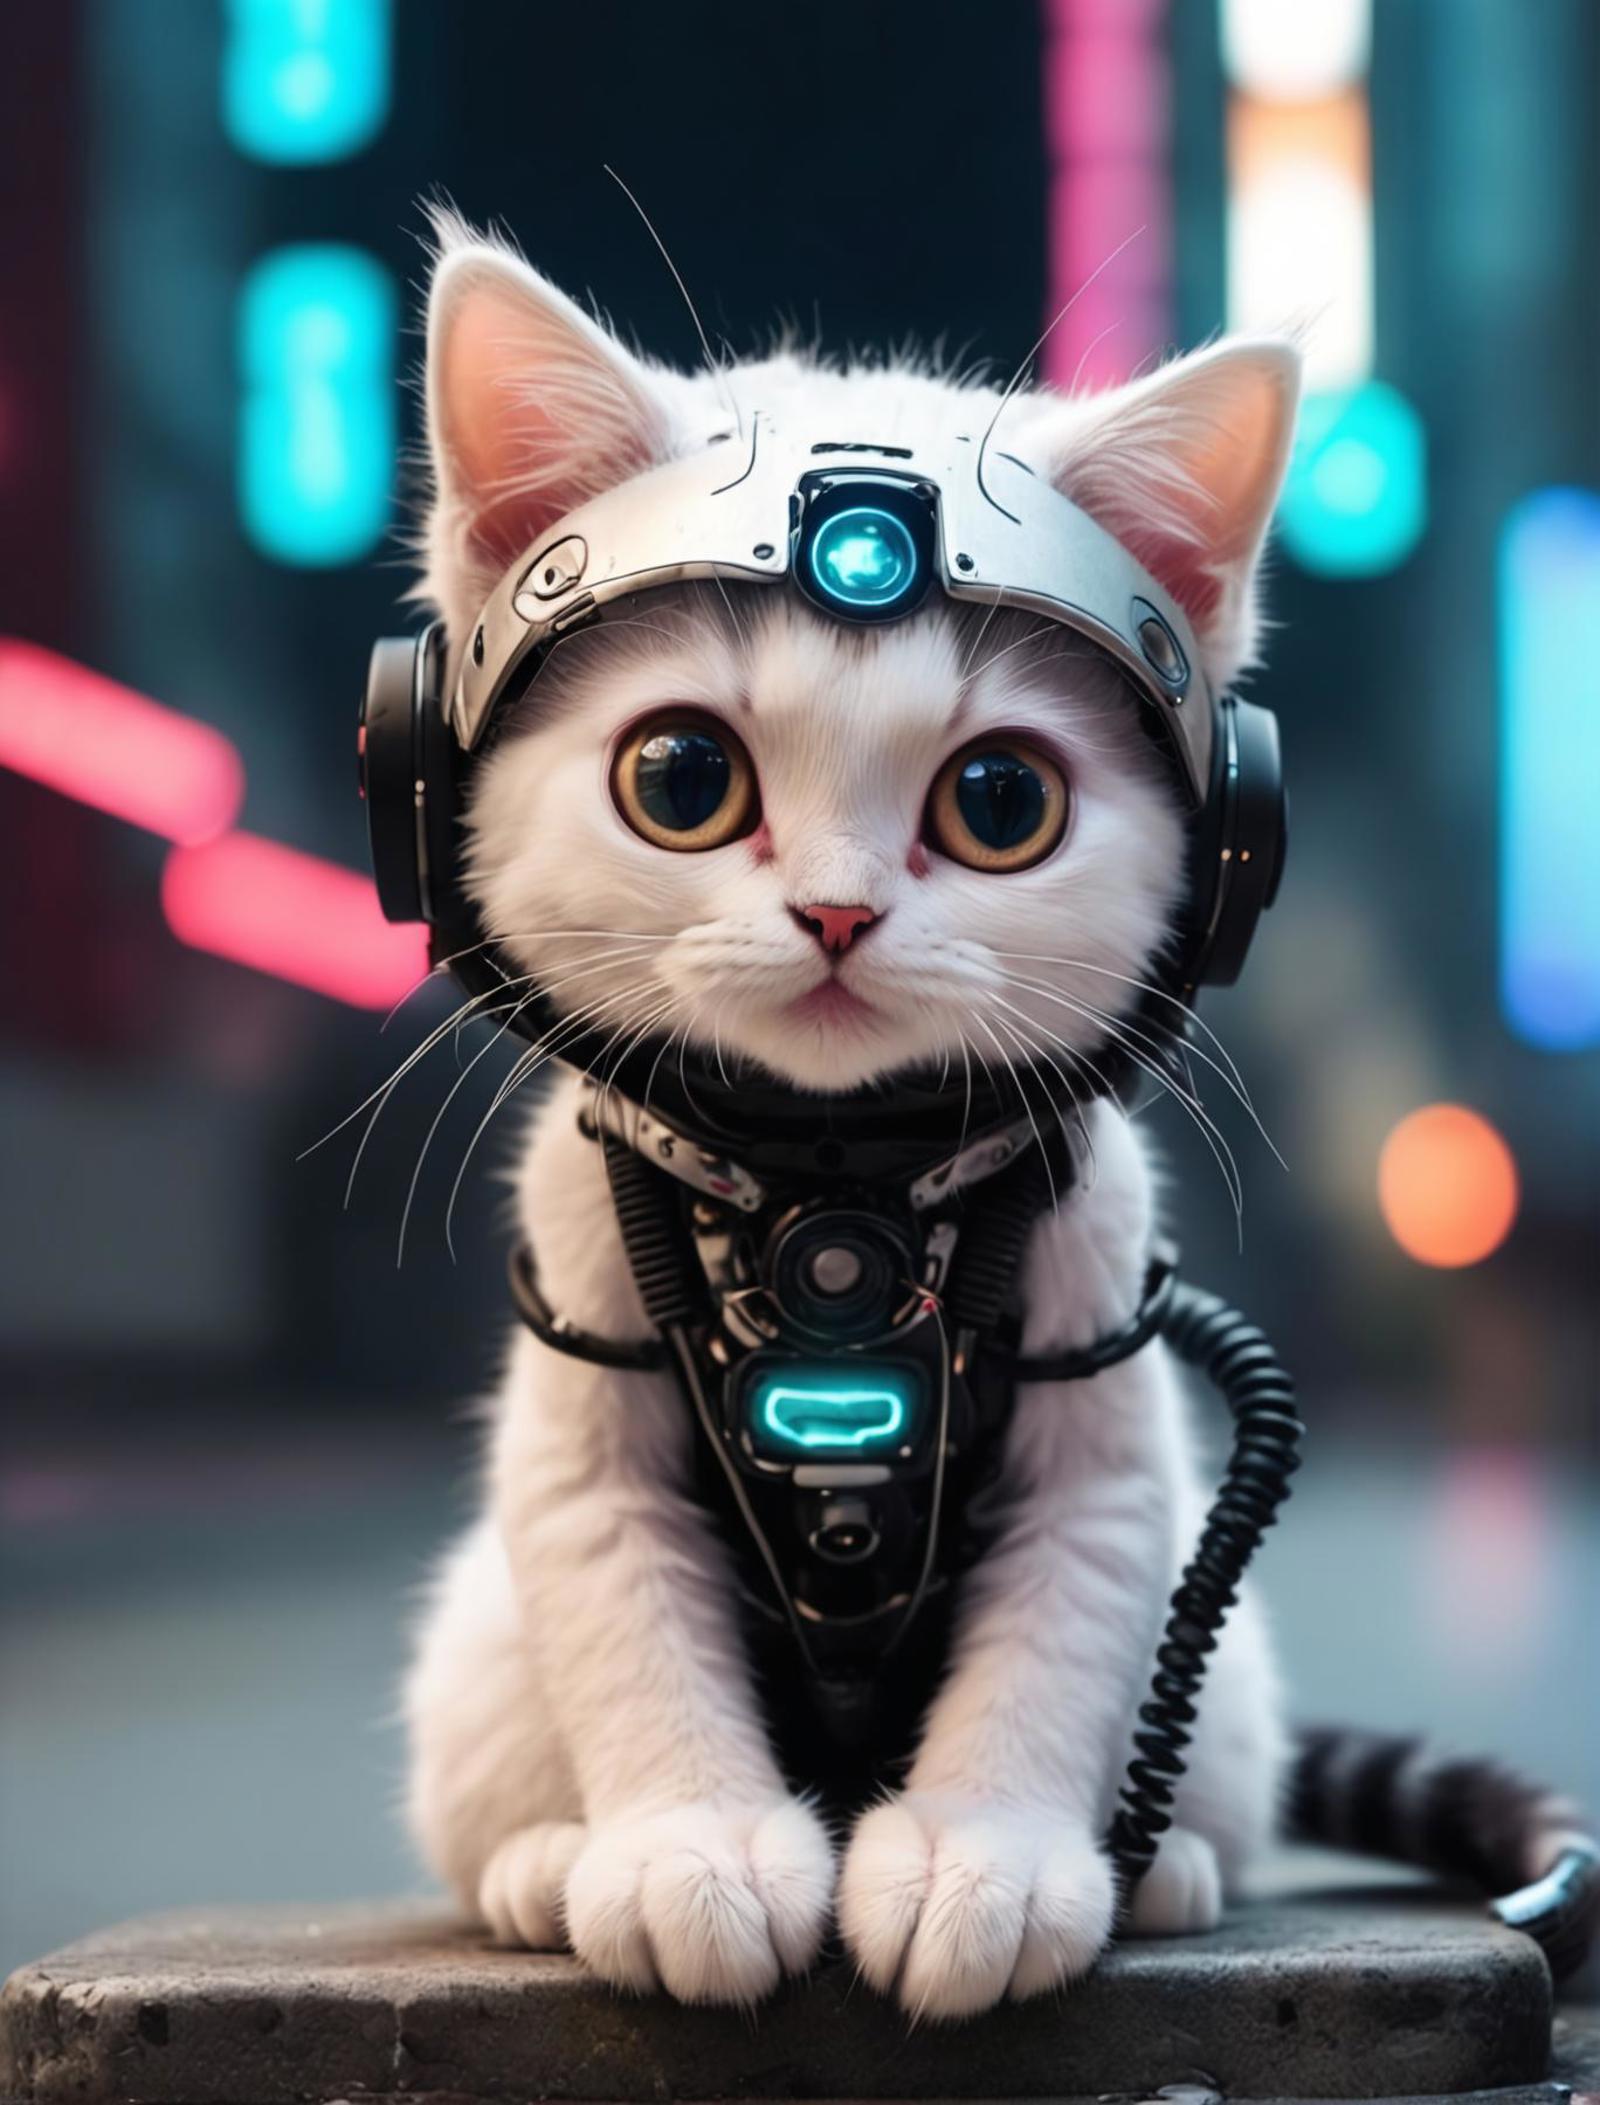 White Kitten Wearing Headphones and Staring at the Camera.